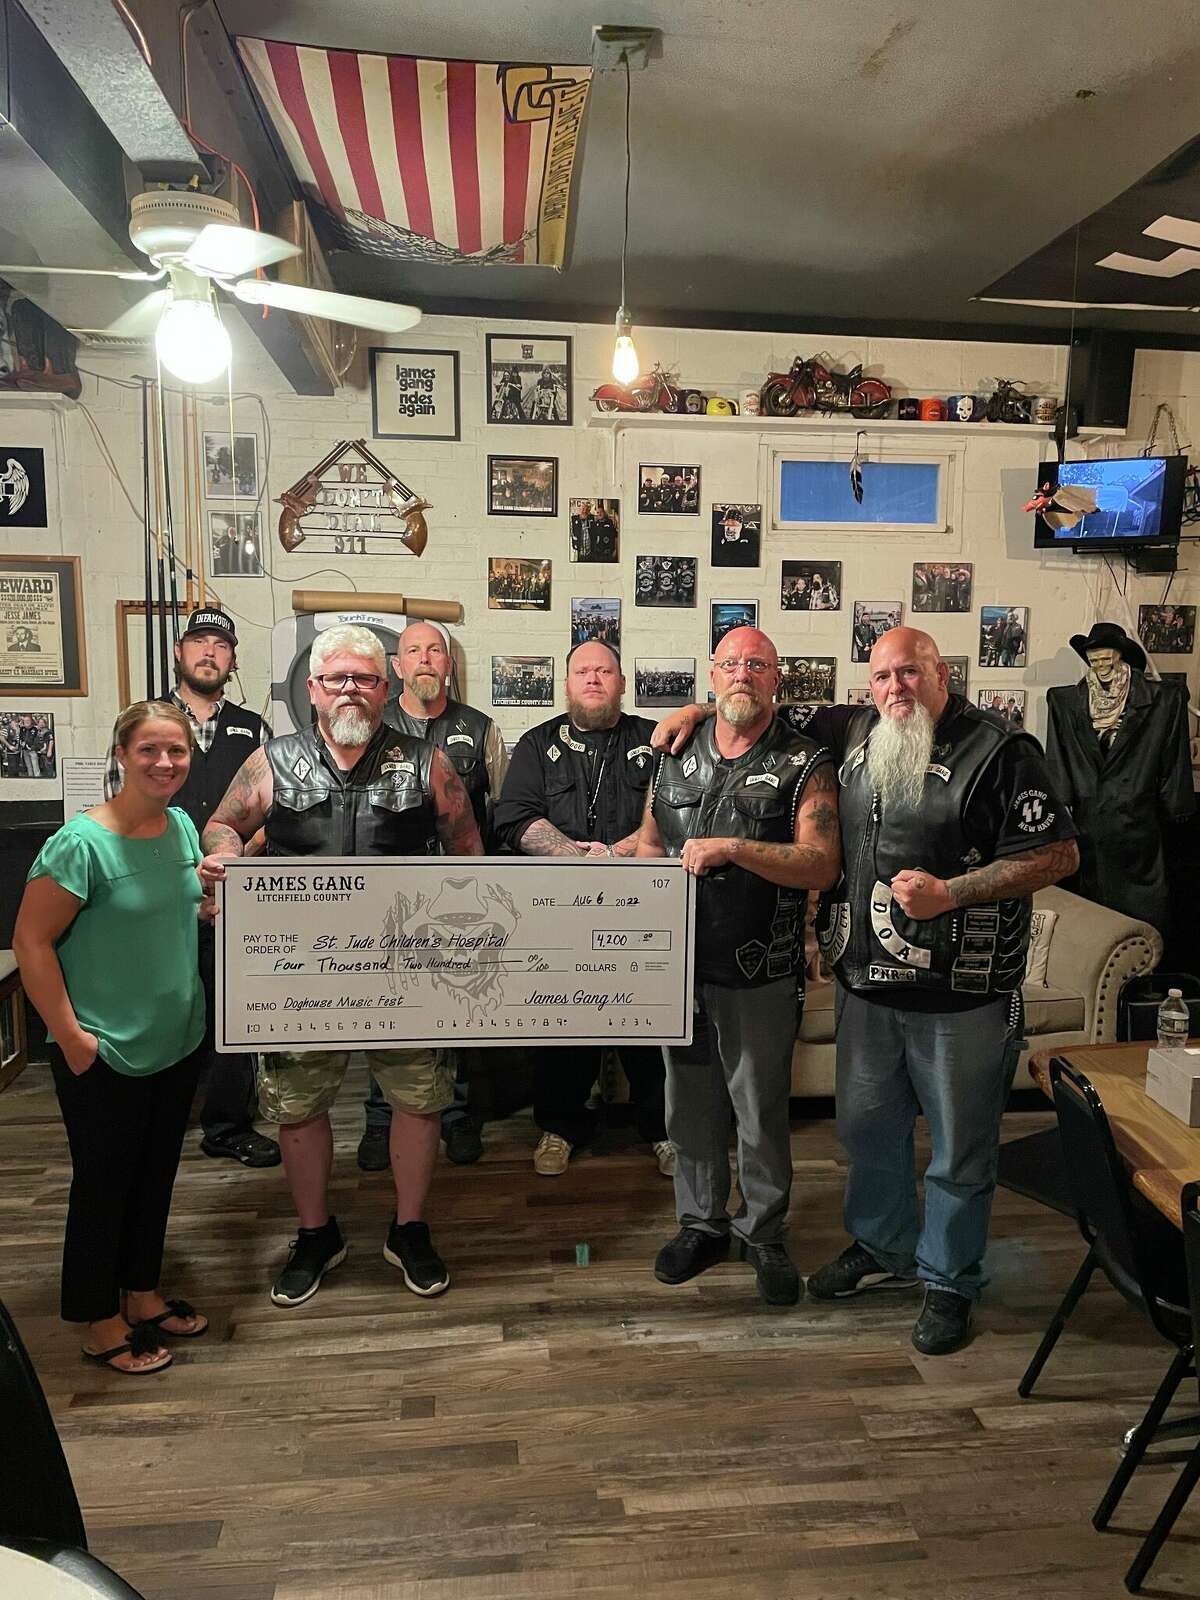 The Tim Driscoll St. Jude's Children's Hospital Telethon member Kristin Raymond - the late Tim Driscoll's daughter and a lead member of the annual fundraiser, recently with the James Gang Motorcycle Club to accept their annual donation to St. Jude. In August, members held their 5th Annual Doghouse Music Fest and raised $4,200 for the children and families at St. Jude. 